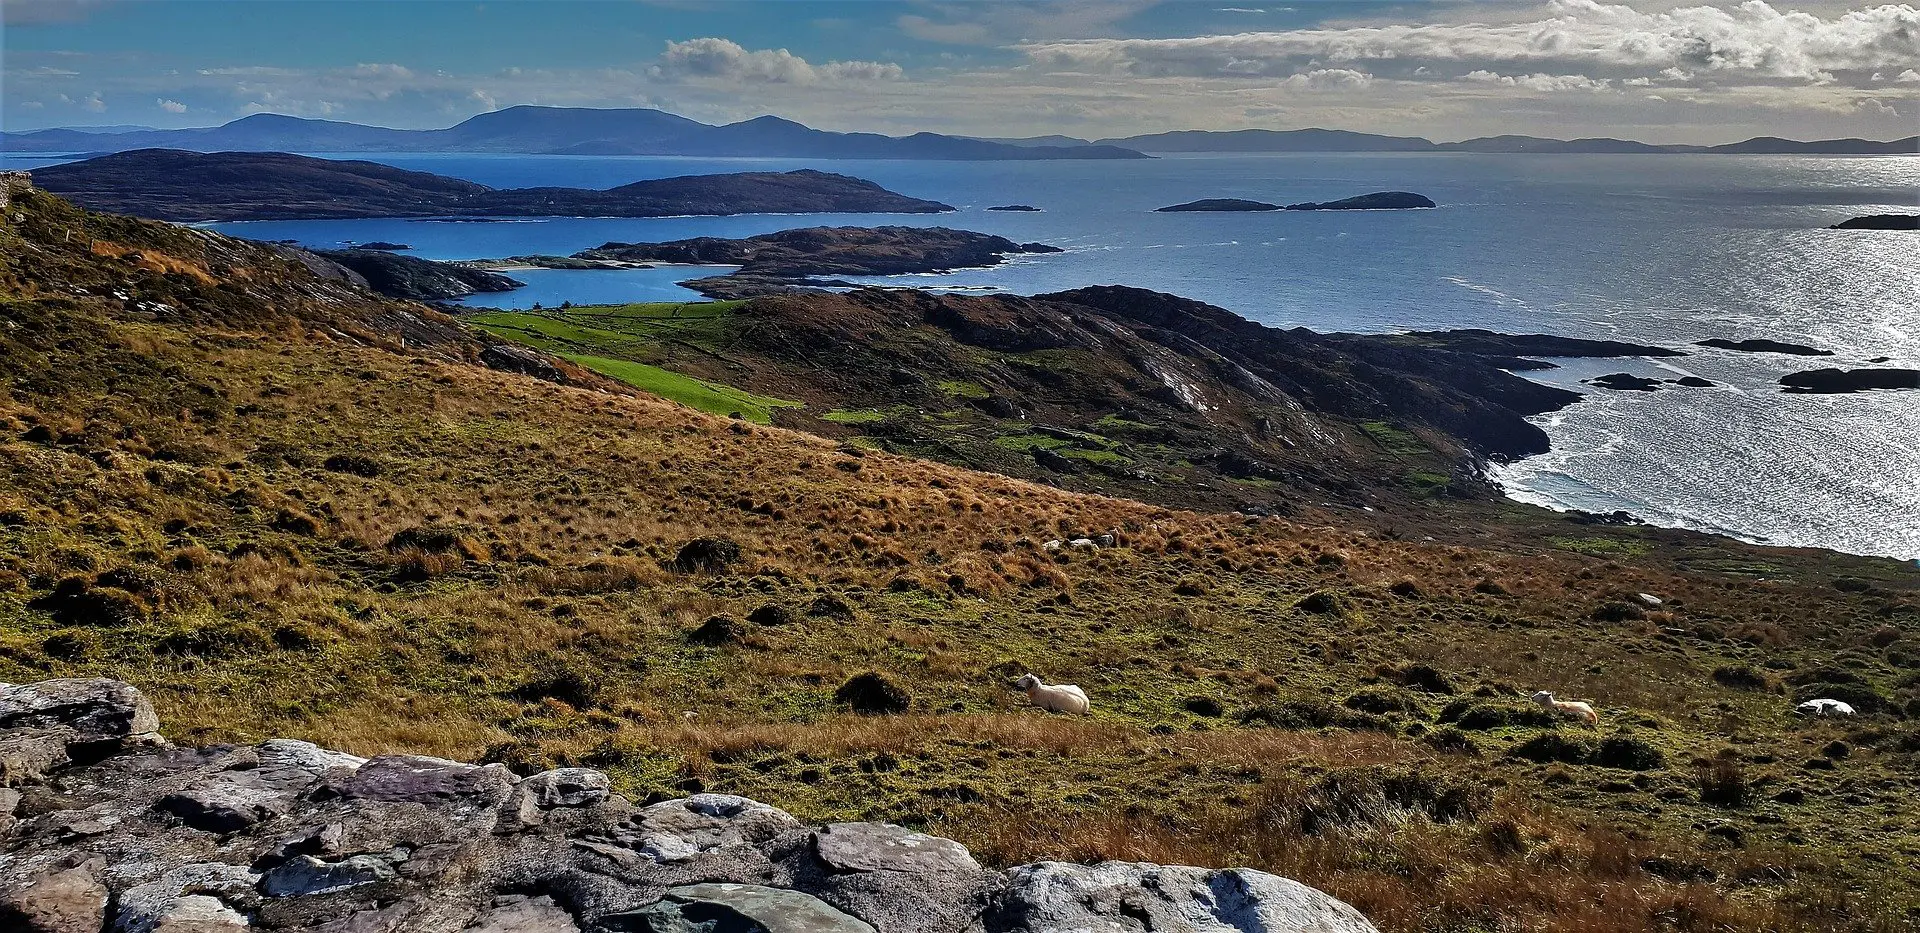 The Ring of Kerry